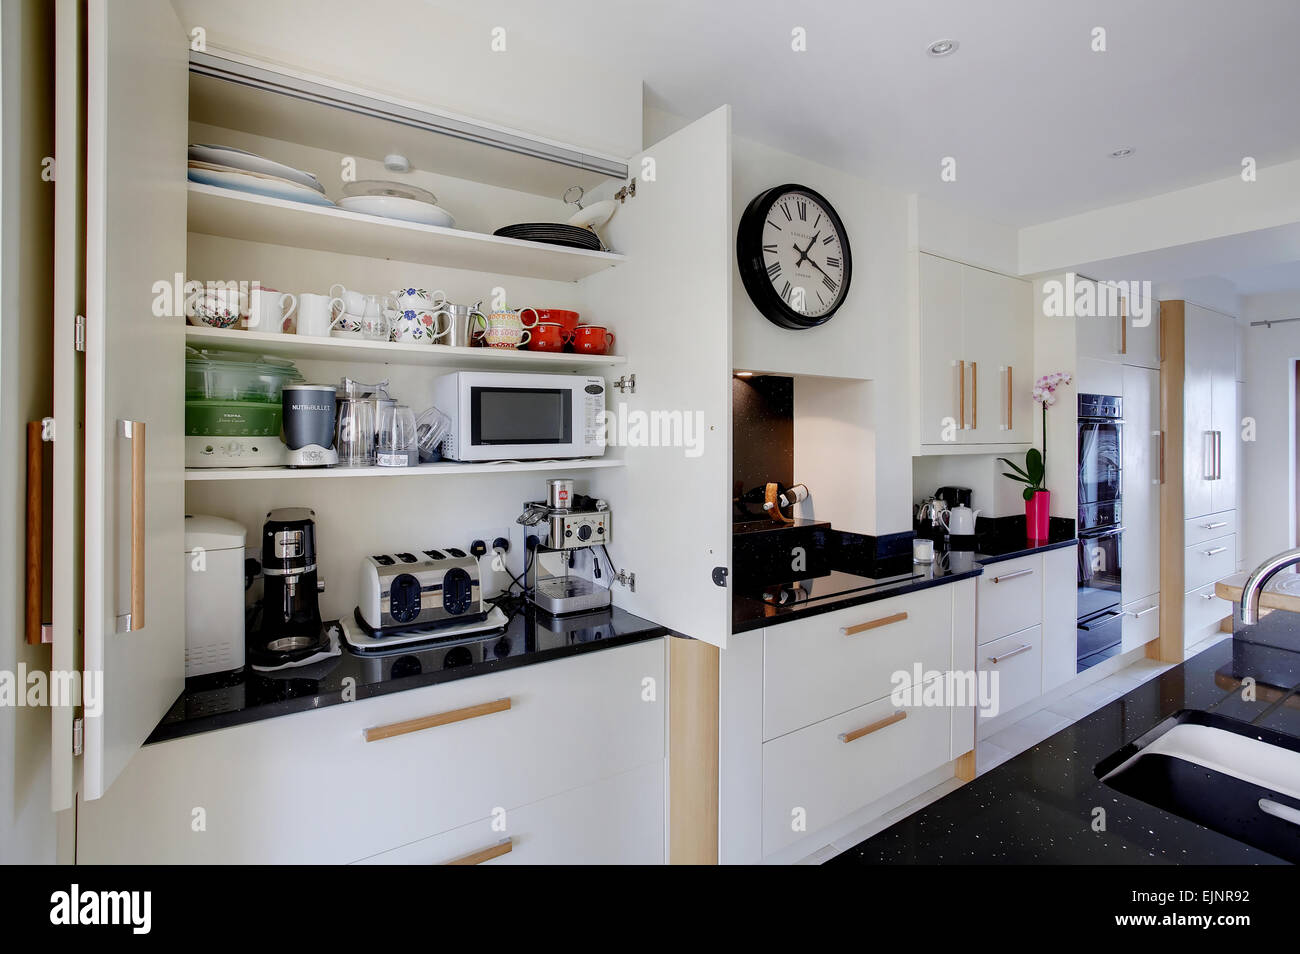 https://c8.alamy.com/comp/EJNR92/a-modern-cream-kitchen-with-cupboard-doors-open-inside-a-home-in-the-EJNR92.jpg